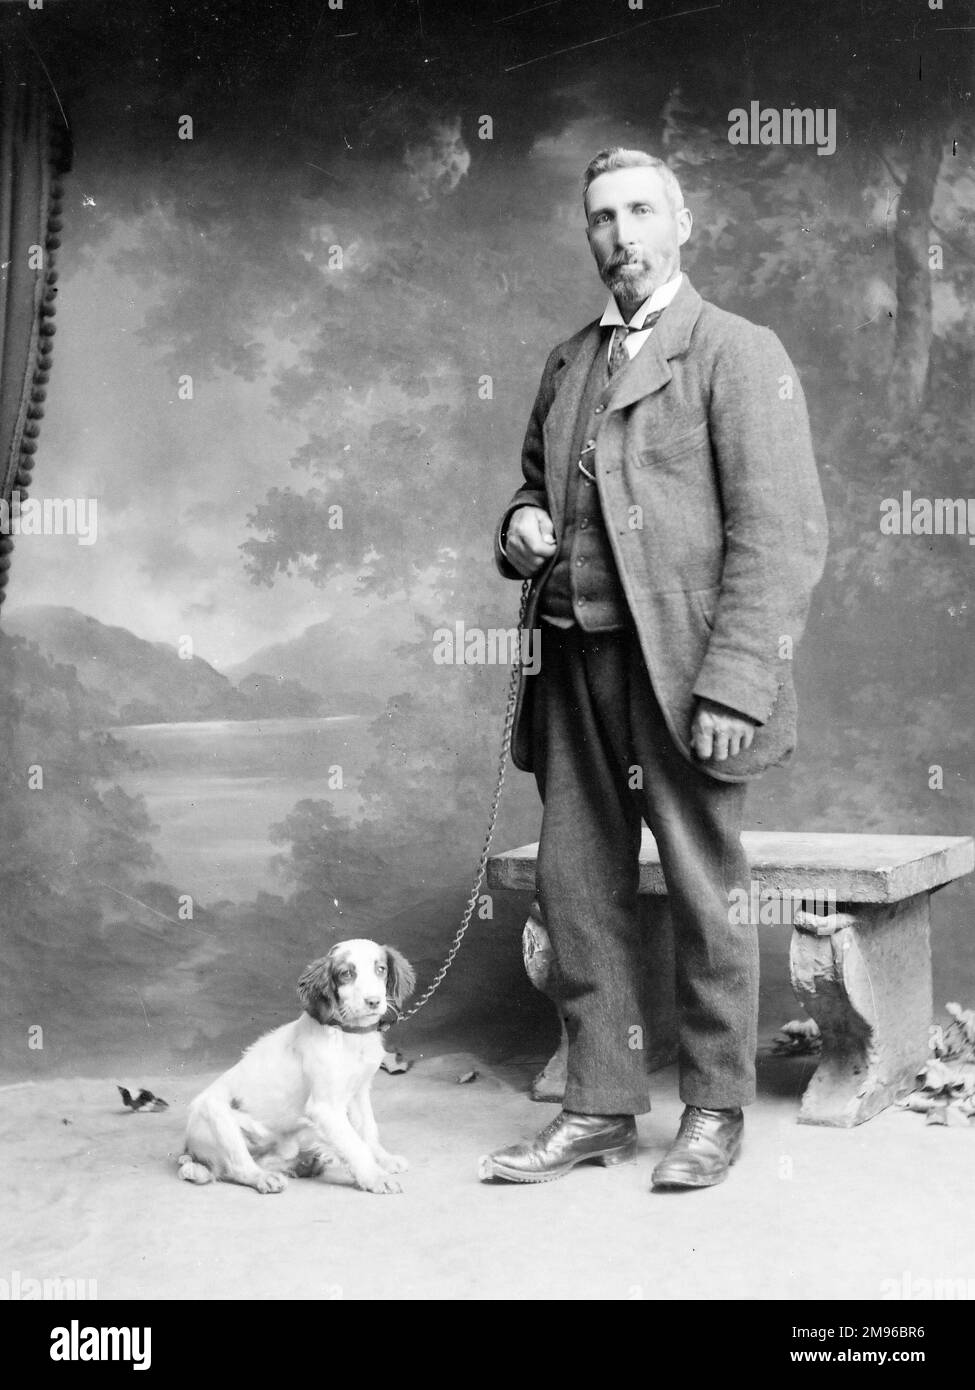 A middle aged man poses in the photographer's studio, Mid Wales, with a spaniel puppy on a chain.  There is a stone bench behind him, and a painted backdrop of a lake and mountains. Stock Photo